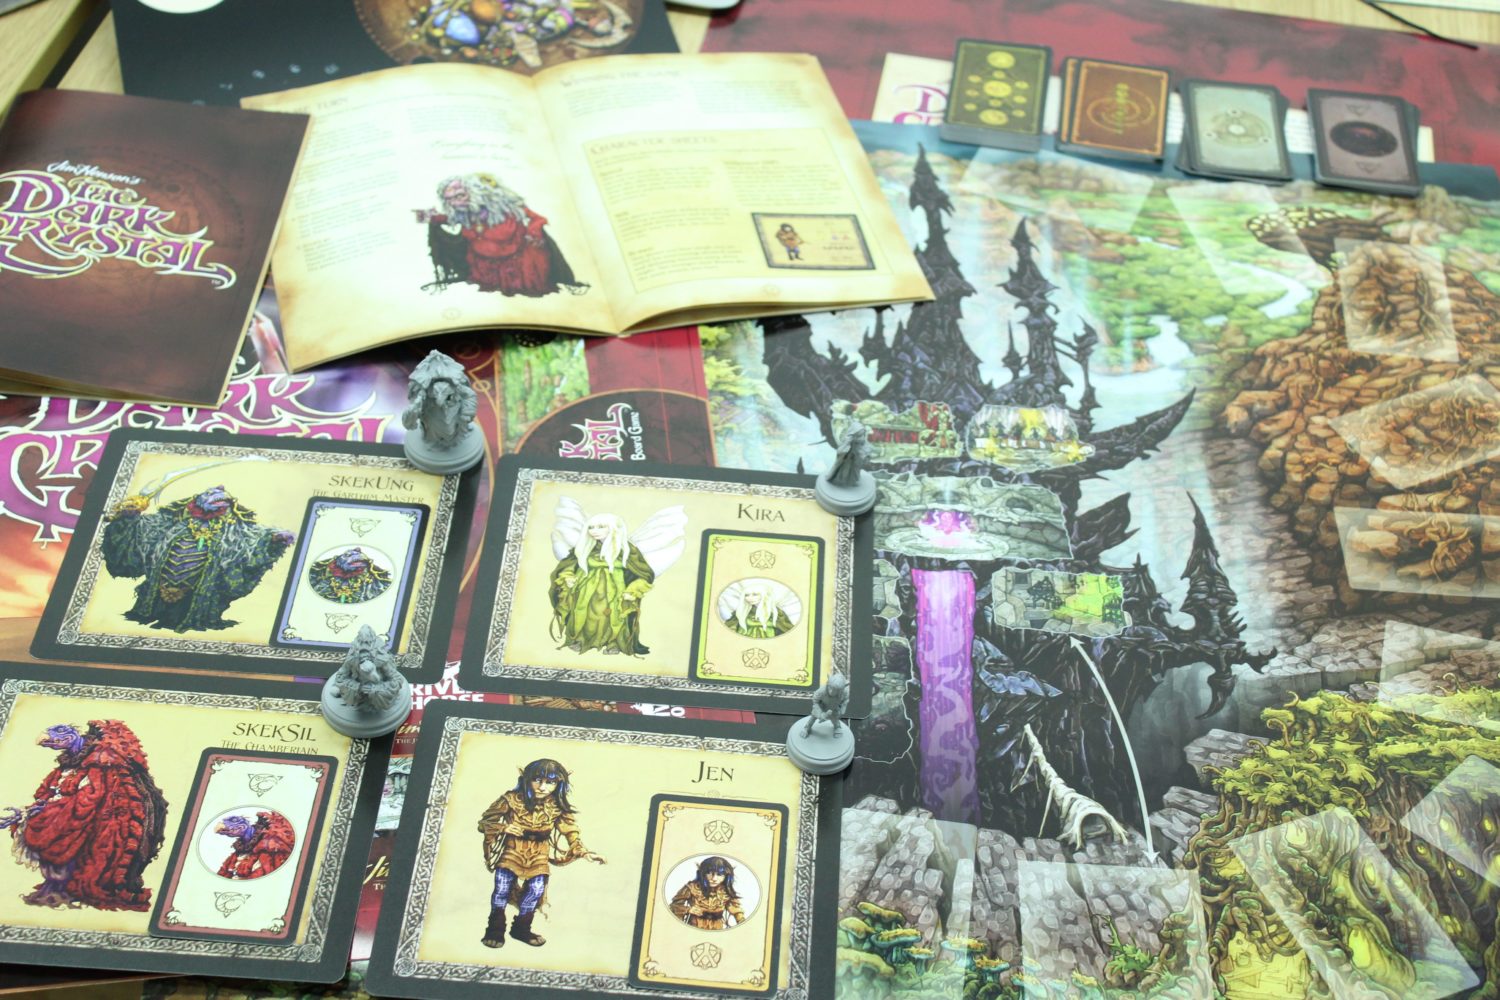 Prototype preview of Jim Henson's The Dark Crystal Board Game by River Horse